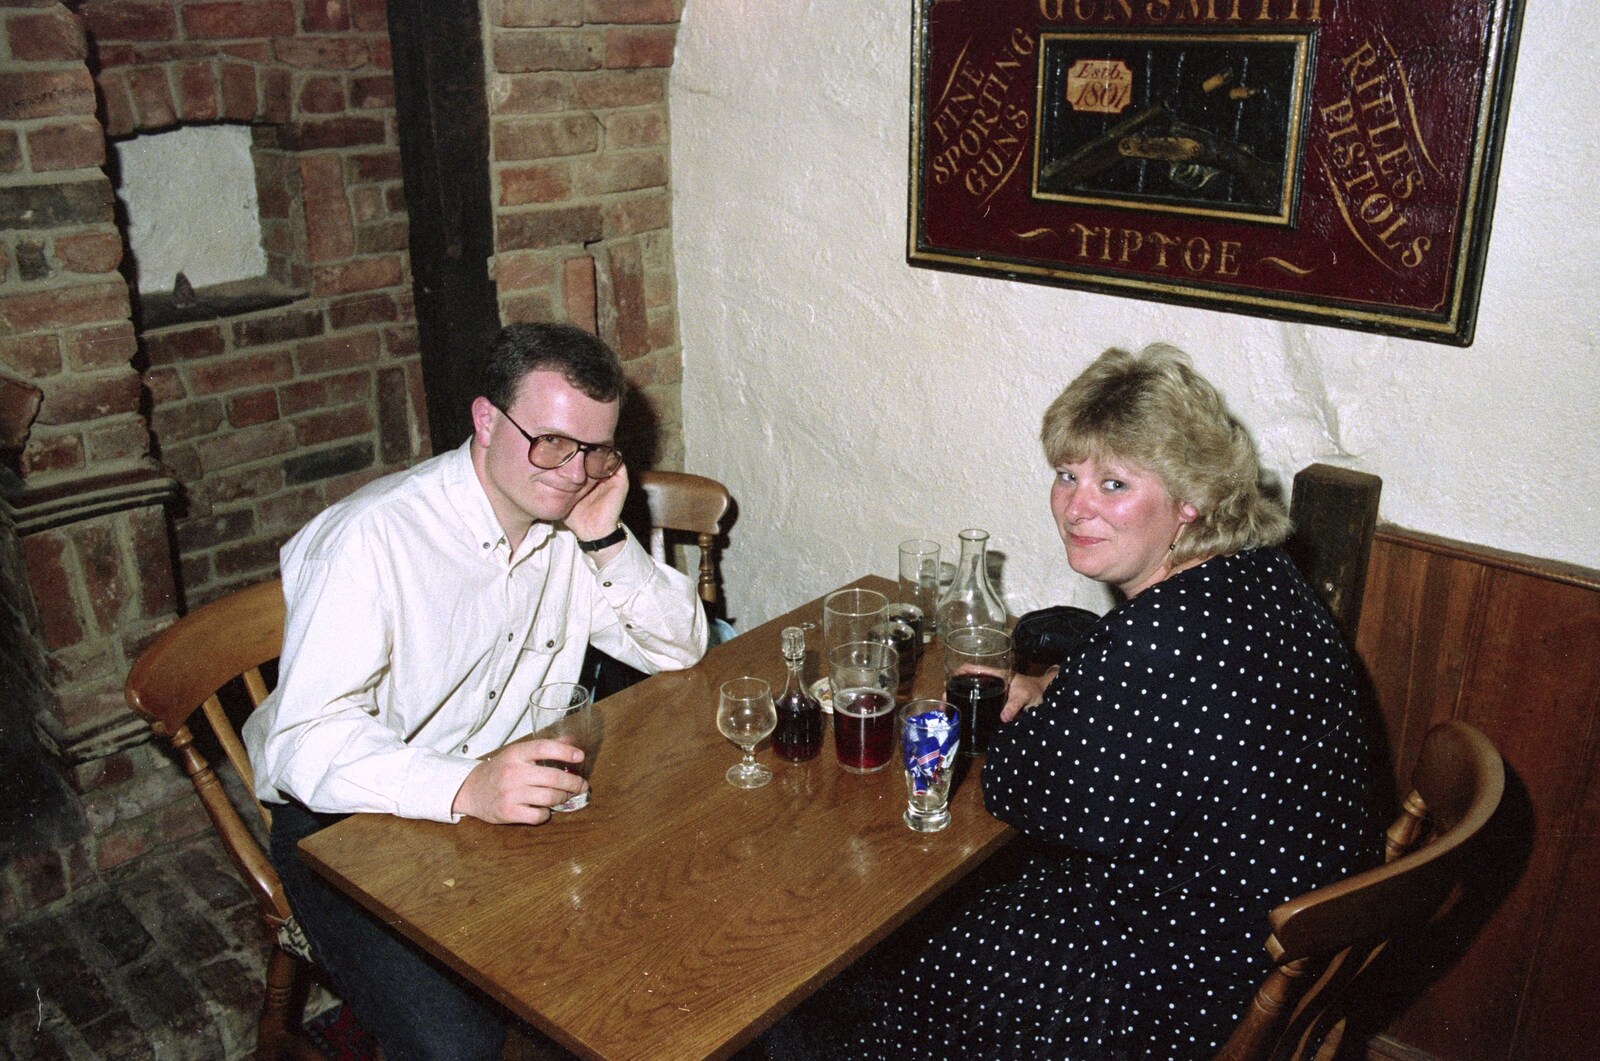 Chris and Phil's Party, Hordle, Hampshire - 6th September 1989: Hamish and Anna in the Plough Inn, Tiptoe